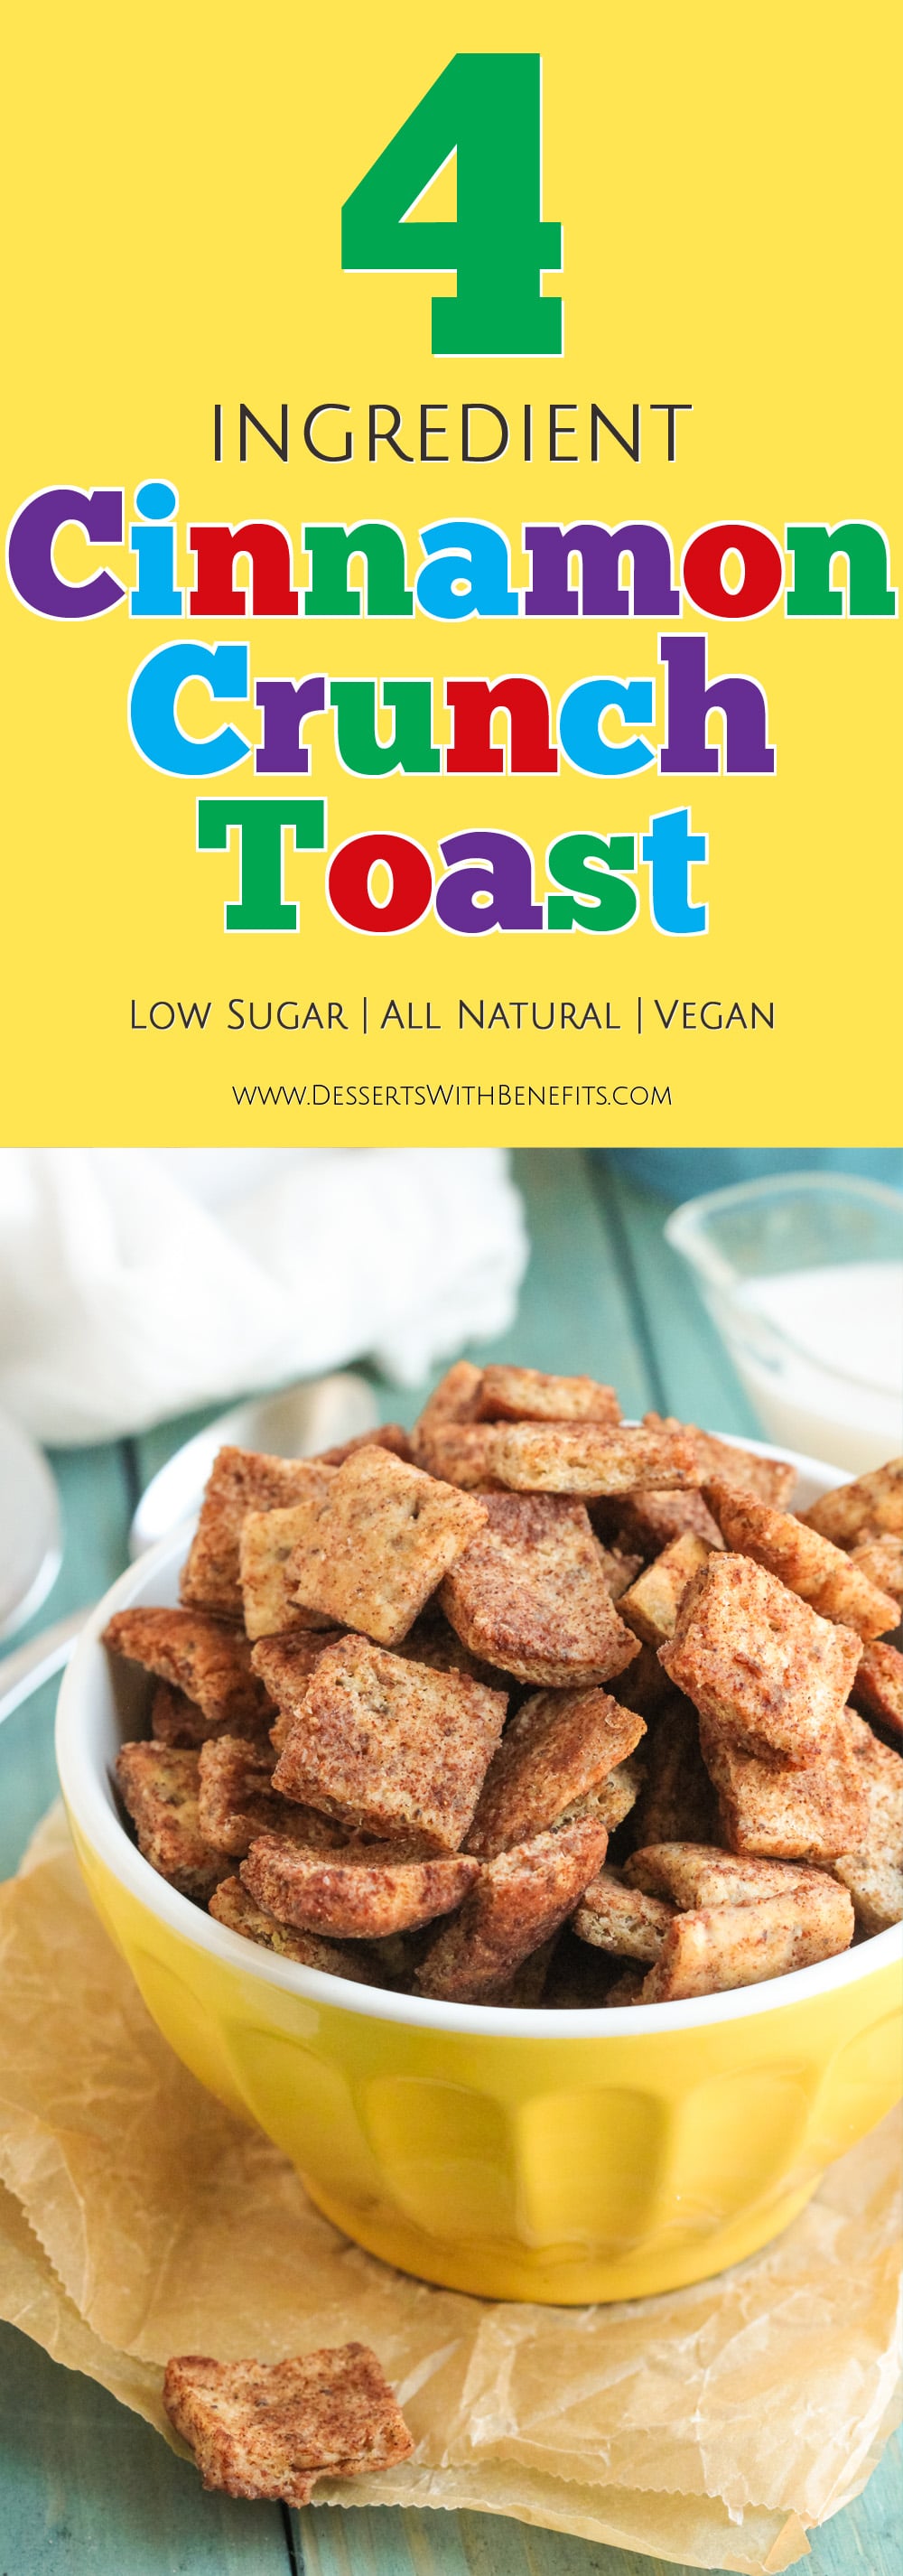 This Healthy Cinnamon Crunch Toast Cereal tastes just like the storebought version. But GUESS WHAT? This healthy homemade version is made without the added sugar, preservatives, and unnecessary additives. This Homemade Cinnamon Toast Crunch is low in sugar, all natural, and even vegan! -- Healthy Dessert Recipes with low calorie, low fat, high protein, and gluten free options at the Desserts With Benefits Blog (www.DessertsWithBenefits.com)